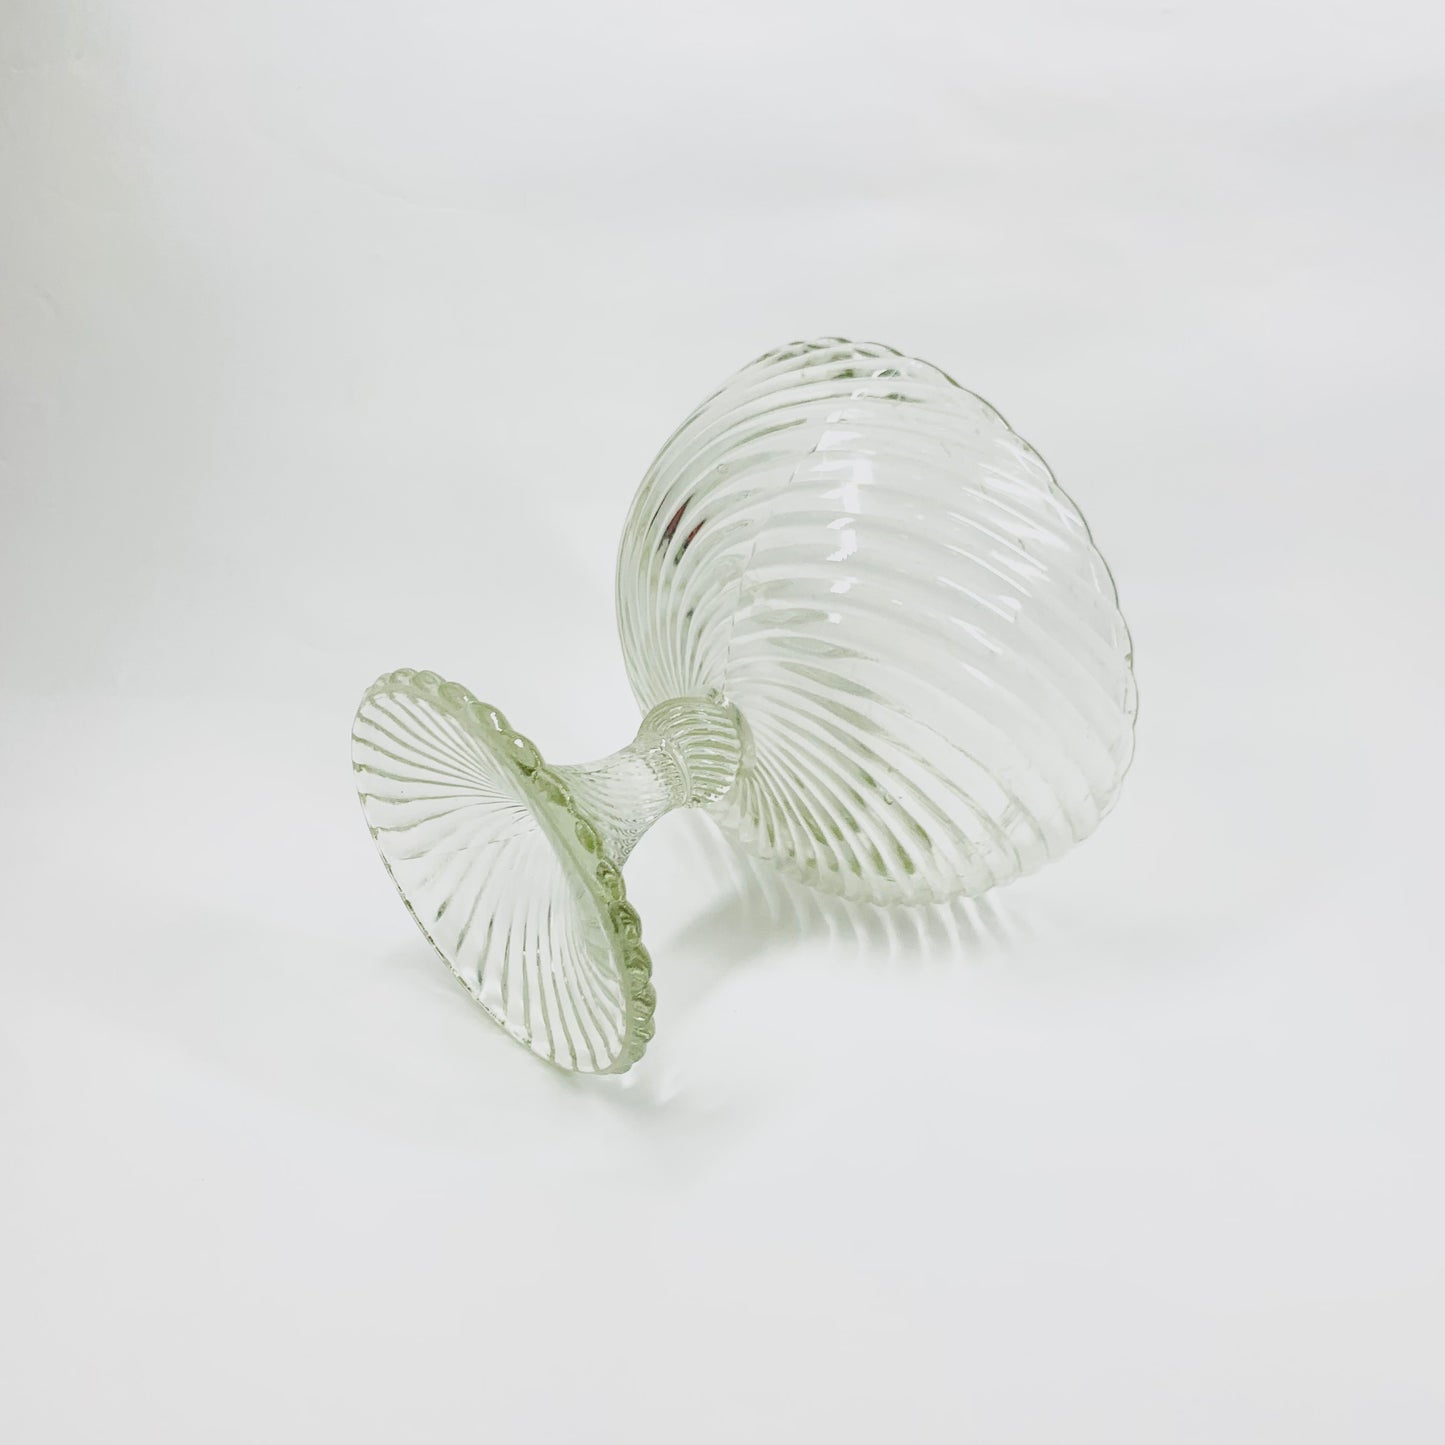 Antique pressed ribbed glass comport